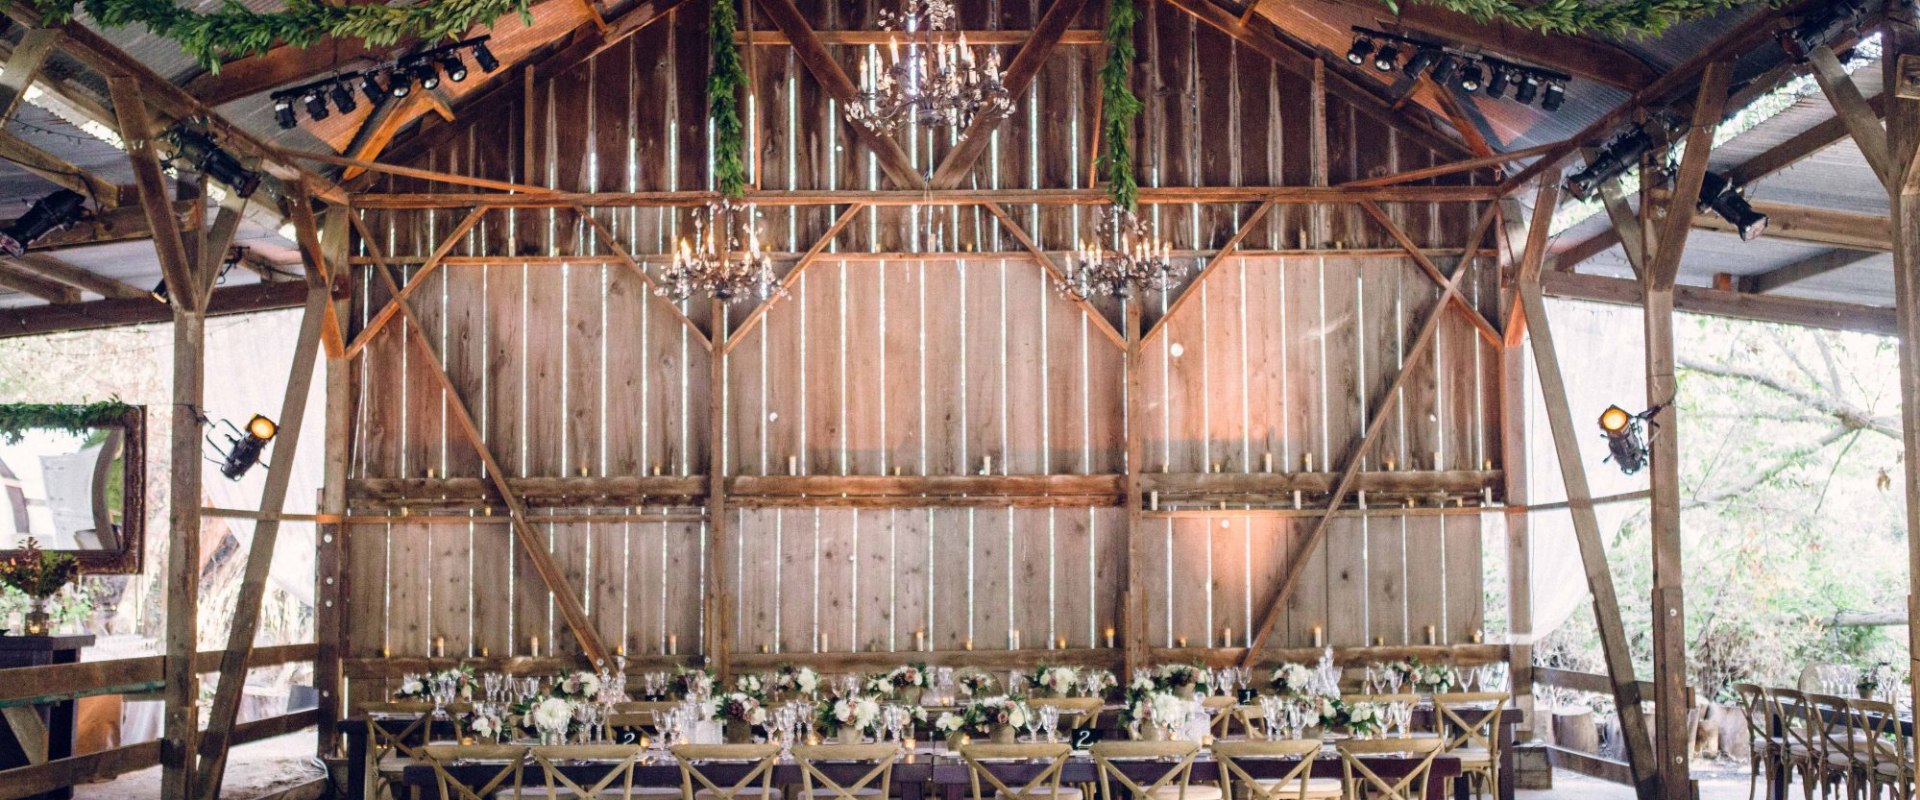 Barn Wedding Venues: Everything You Need to Know